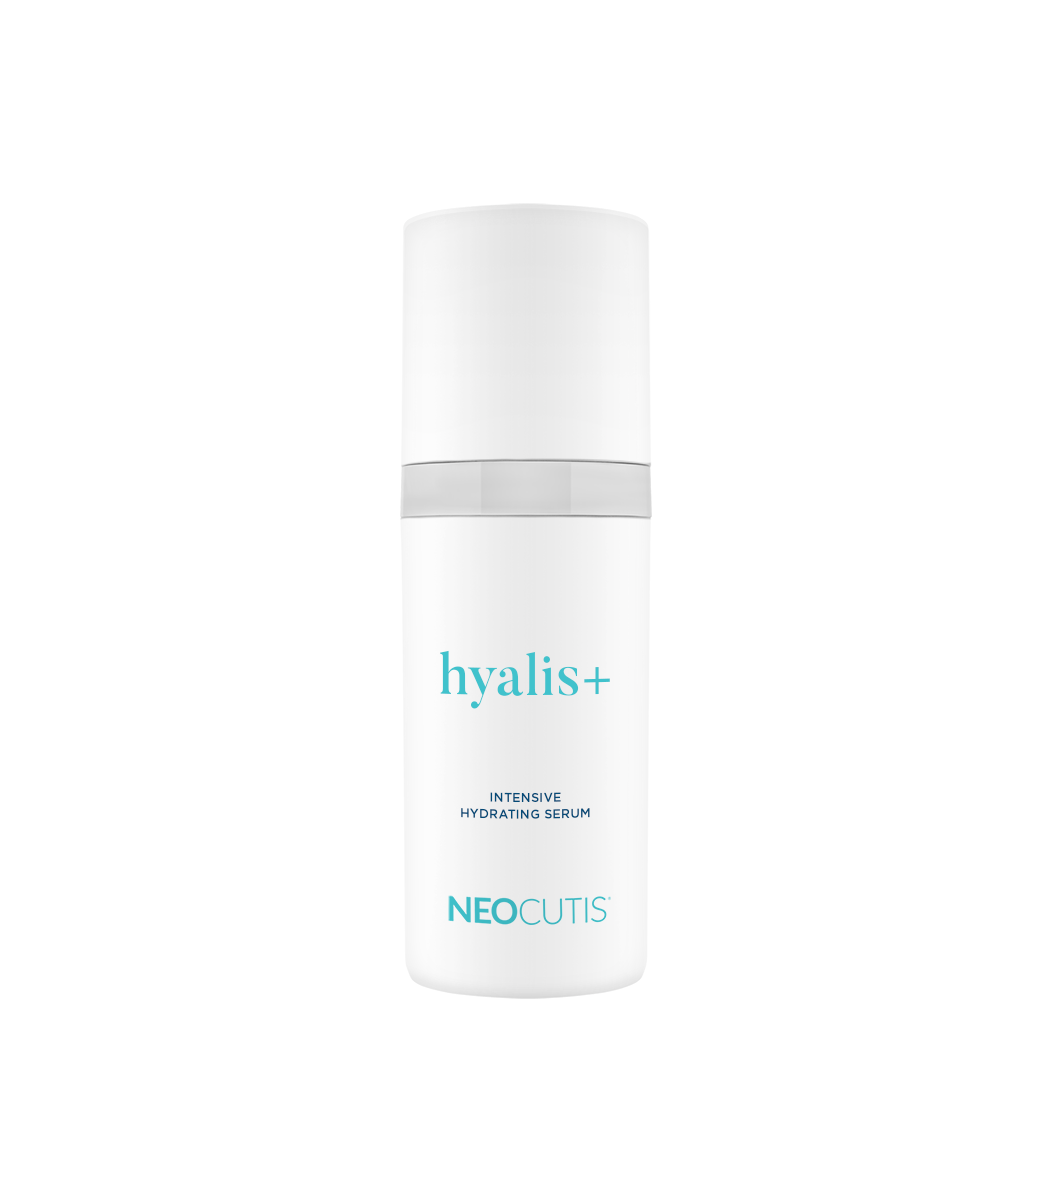 NEOCUTIS Hyalis+ | Intensive Hydrating Serum | 1 Oz | 4 Month Supply | Minimizes appearance of fine lines & wrinkles | Helps increase the level of natural hyaluronic acid in the skin | Dermatologist tested - New and Improved